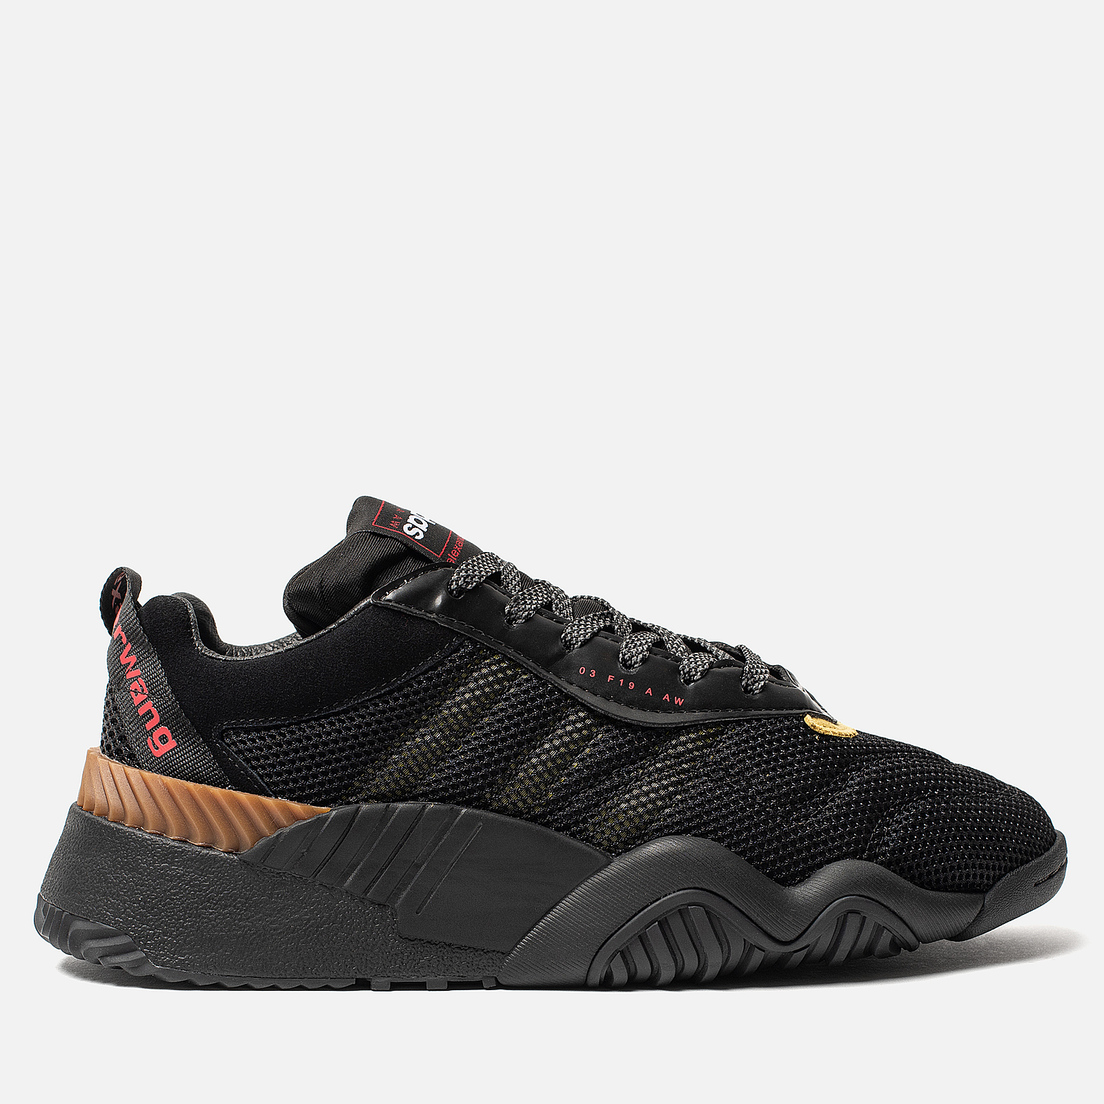 adidas alexander wang turnout trainers